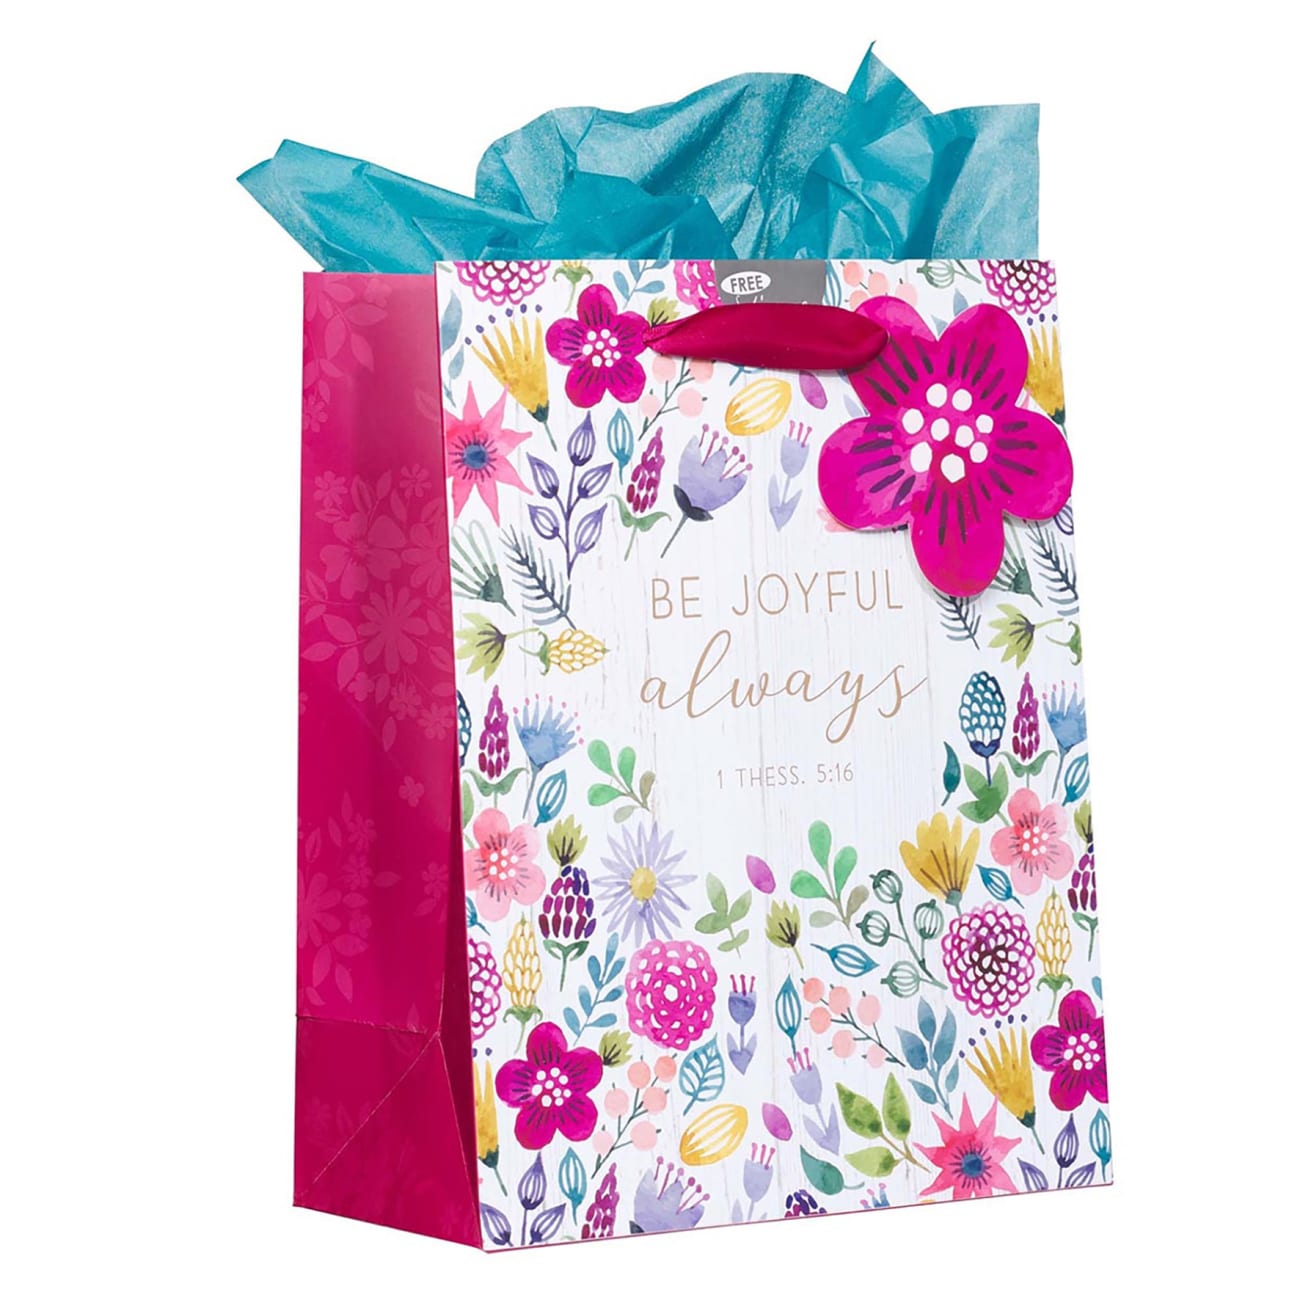 Gift Bag, Medium: Be Joyful Always, Floral, Includes Tissue and Gift Tag Stationery